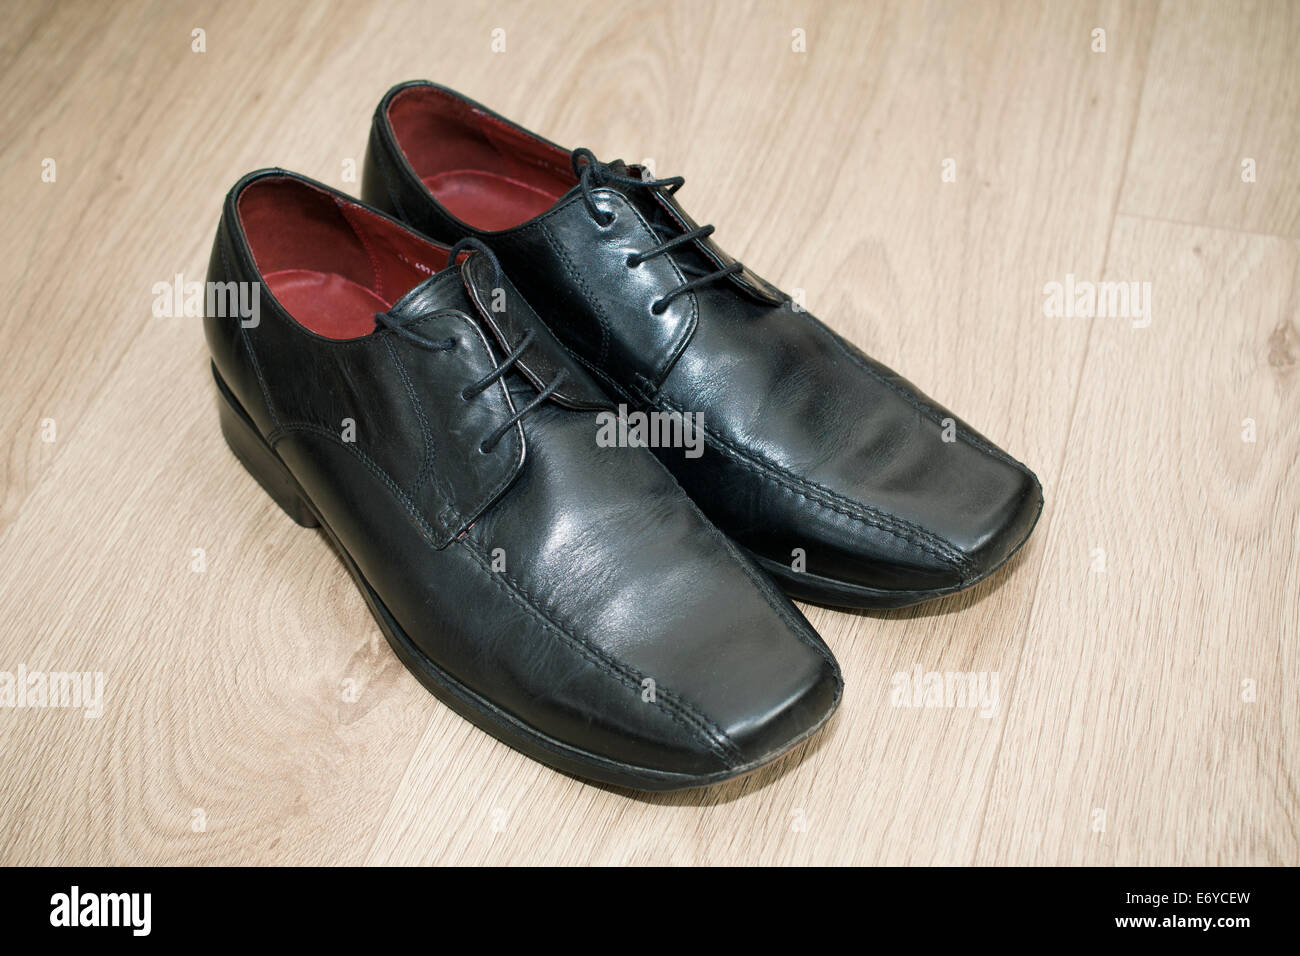 Pair of men's black leather shoes Stock Photo